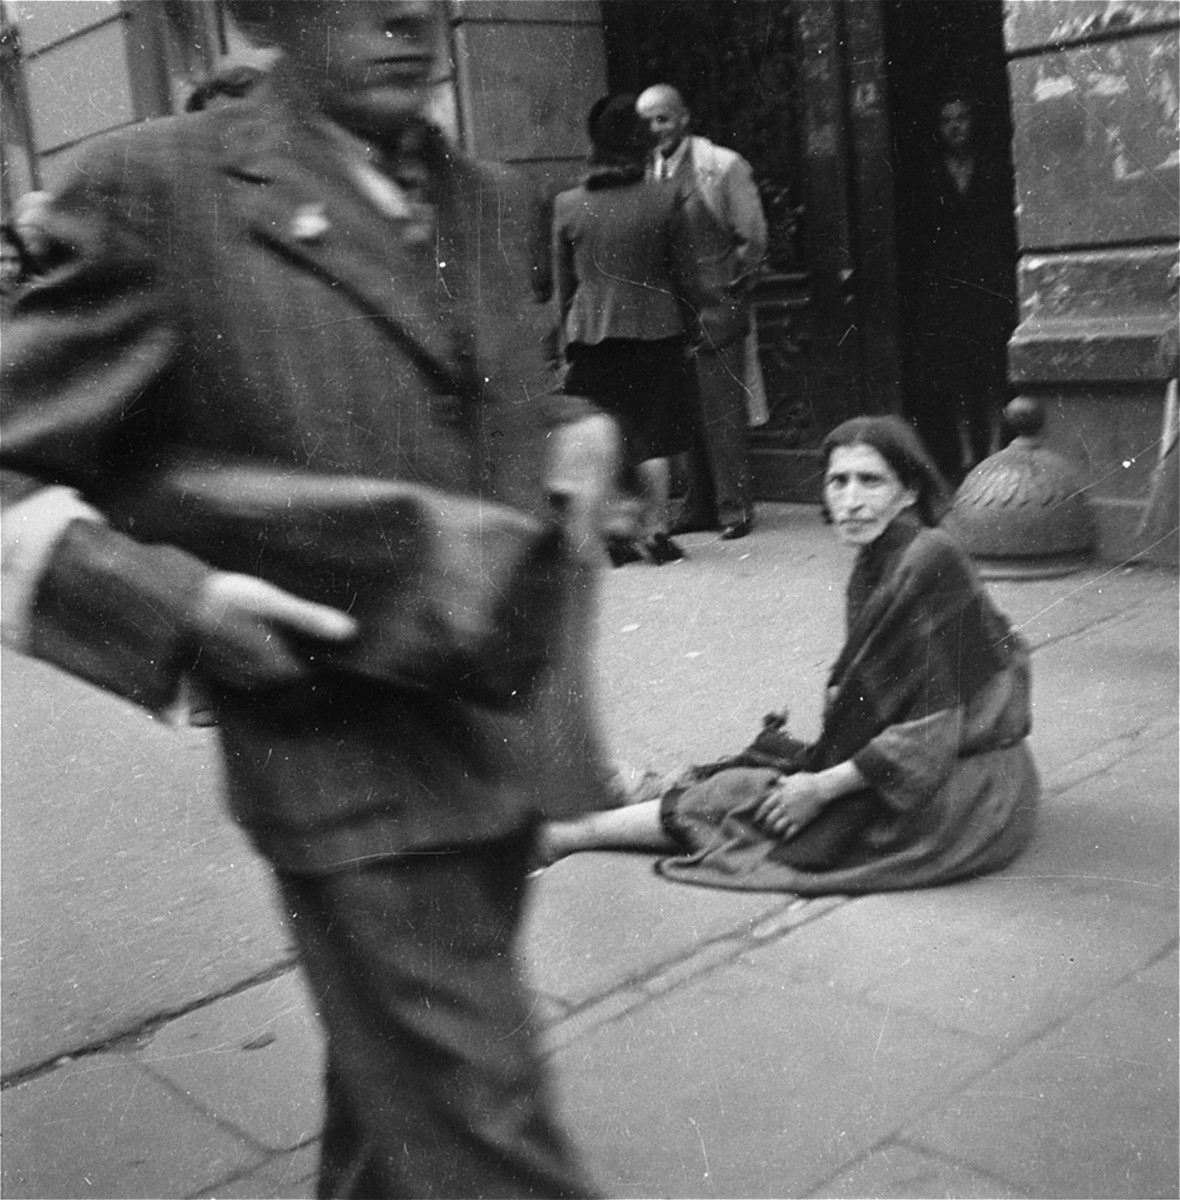 A destitute woman sits in the middle of a busy sidewalk in the Warsaw ghetto.  

Joest's caption reads: "In the middle of the sidewalk sat this wailing woman, over whom no one troubled himself, and begged.  What was astounding was that from time to time she received something even though everything was going so badly with all the others as well."